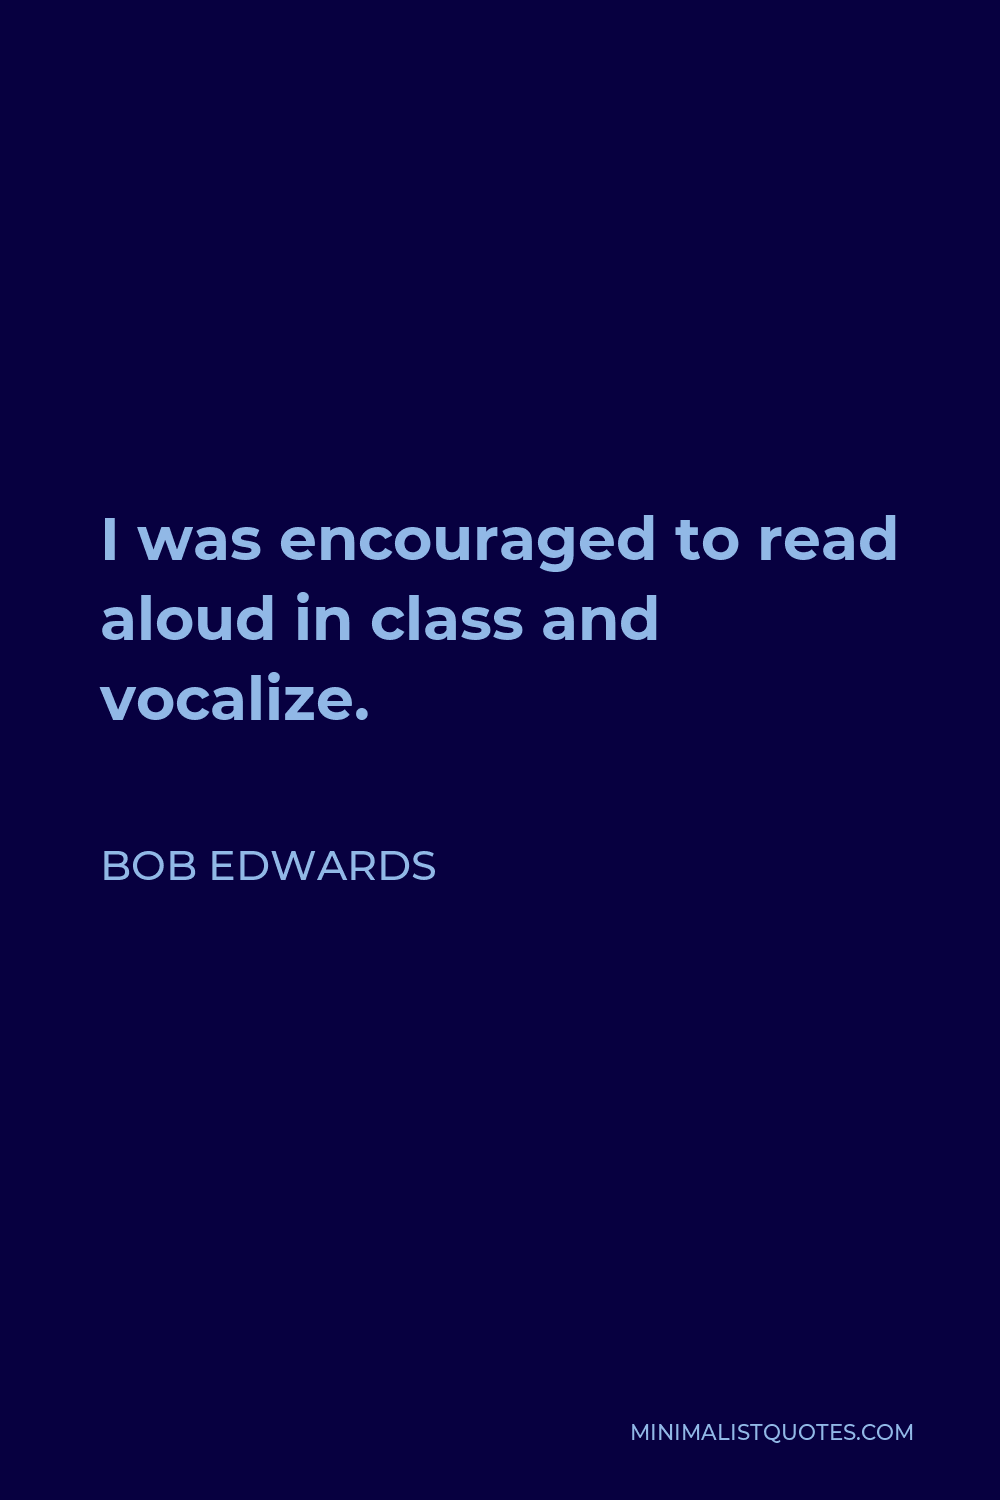 Bob Edwards Quote - I was encouraged to read aloud in class and vocalize.